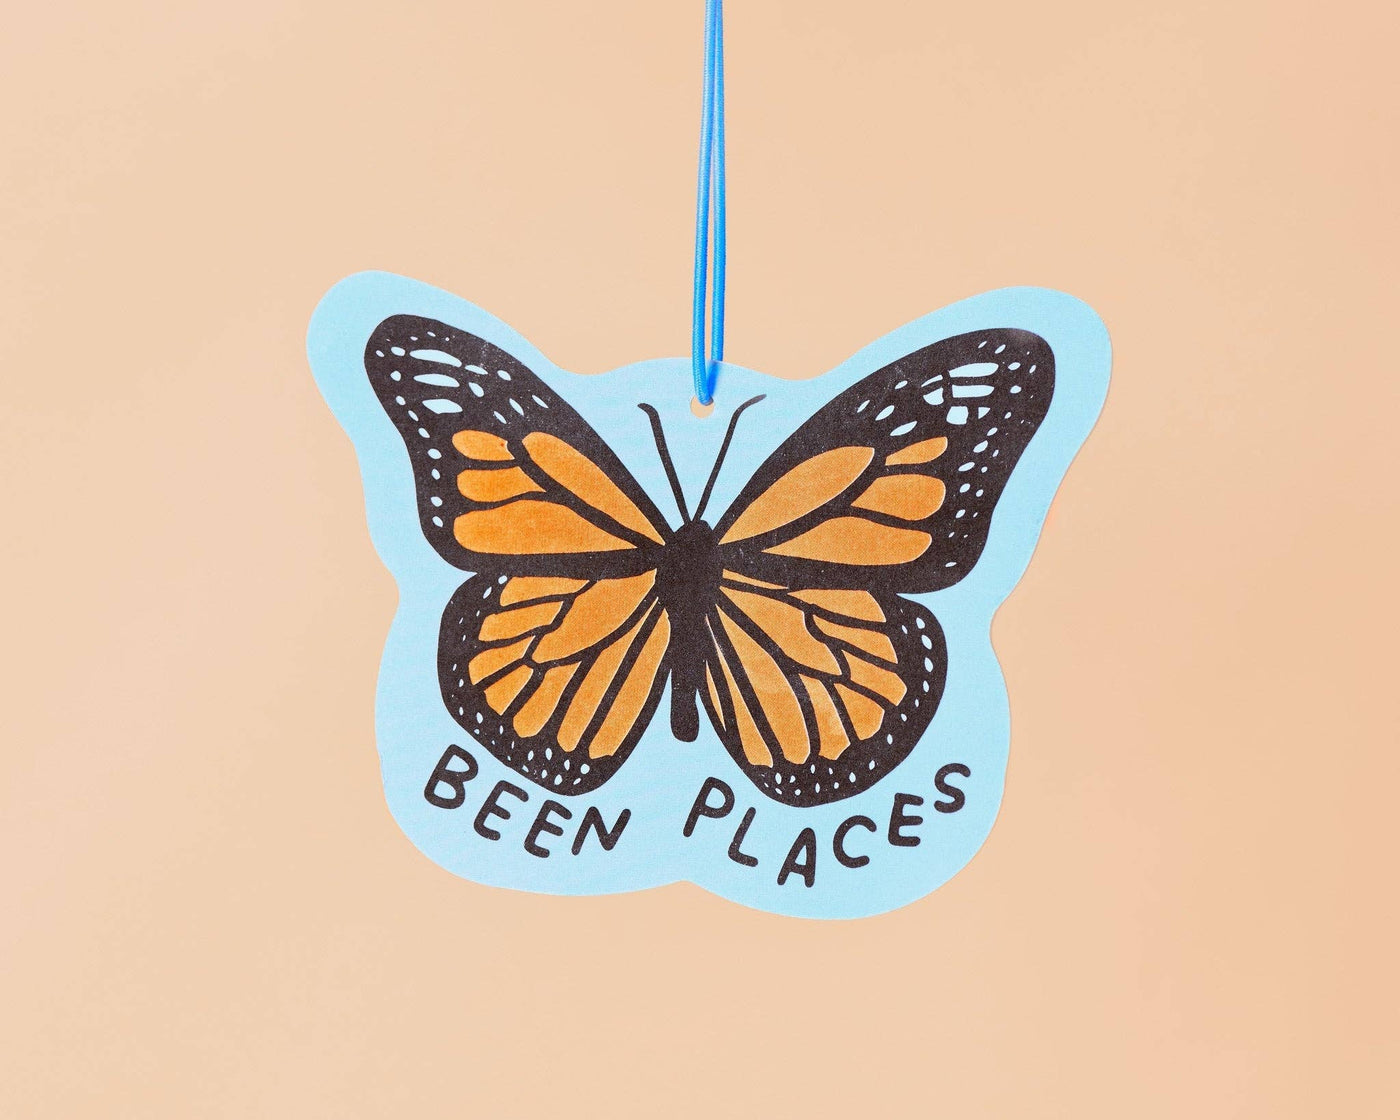 And Here We Are - Going Places Butterfly Air Freshener - Grass Scent